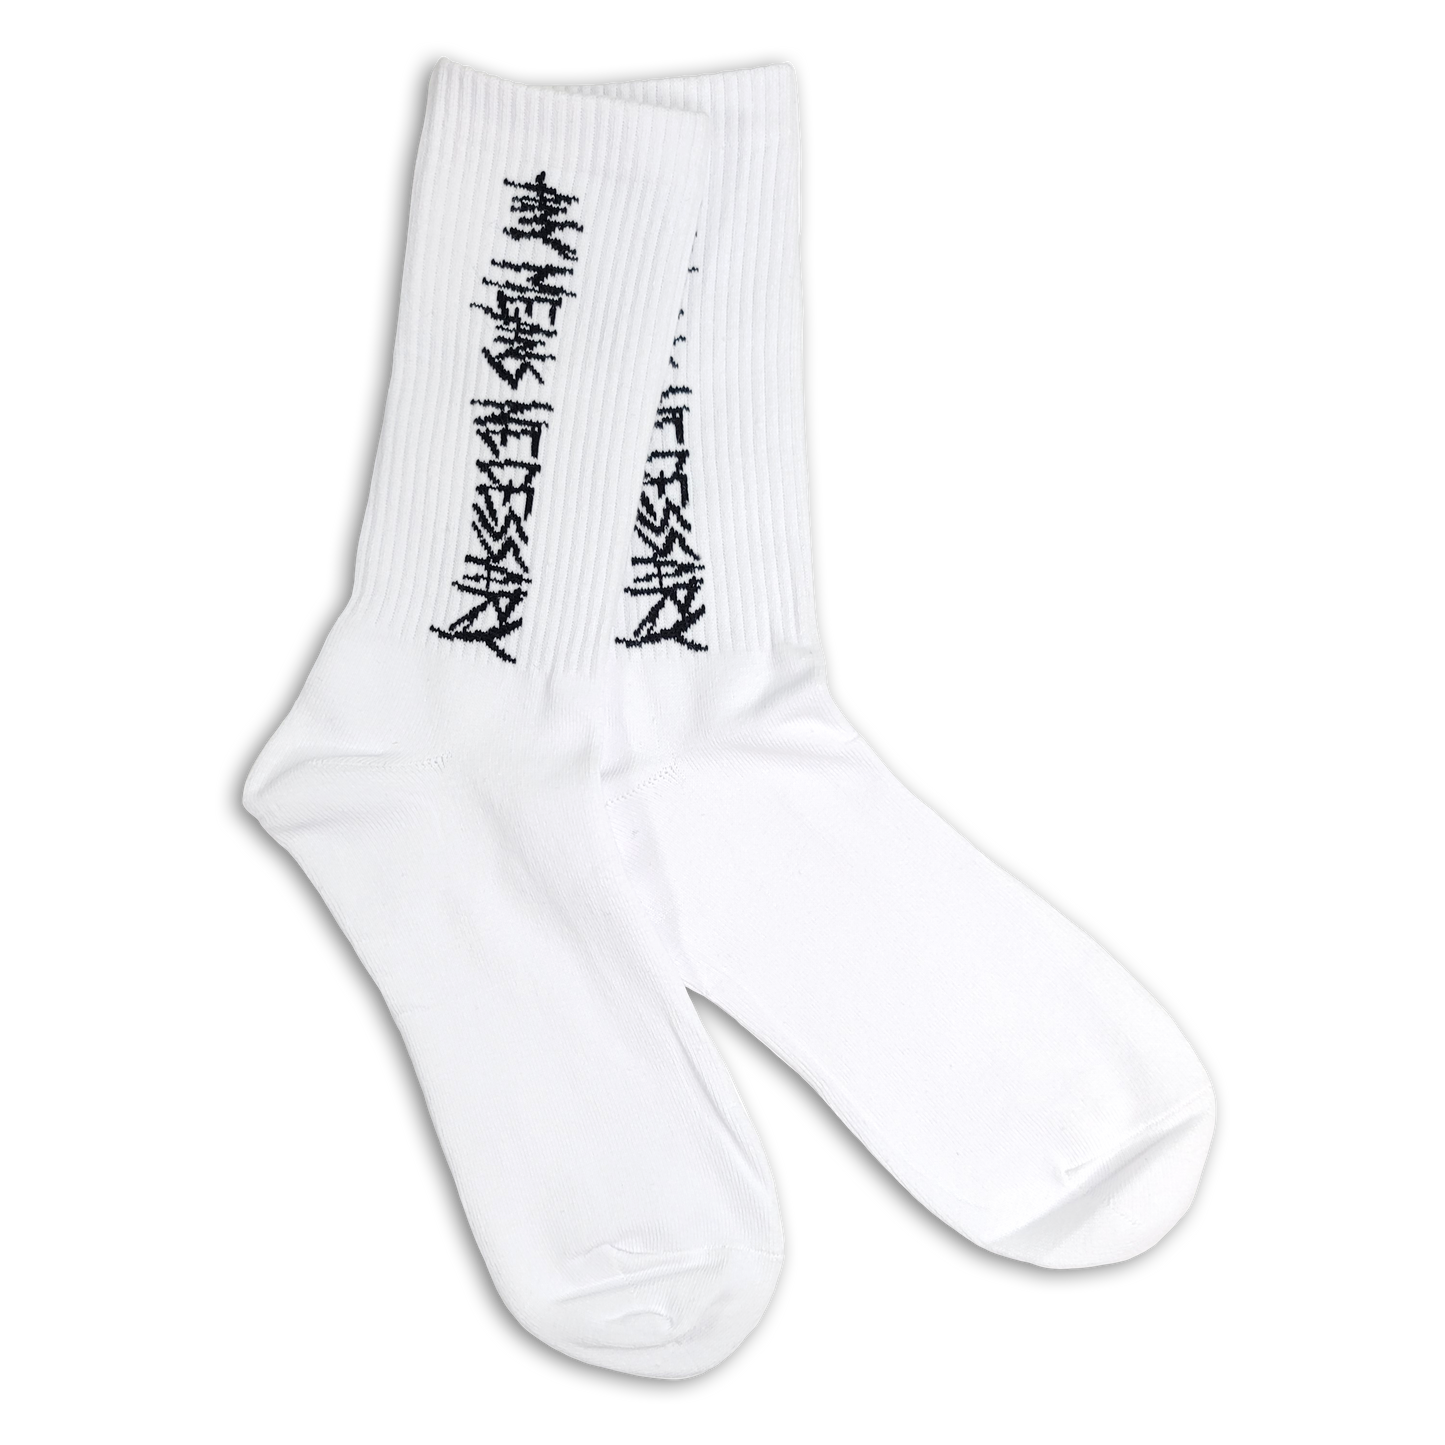 any means necessary shawn coss sketchy socks